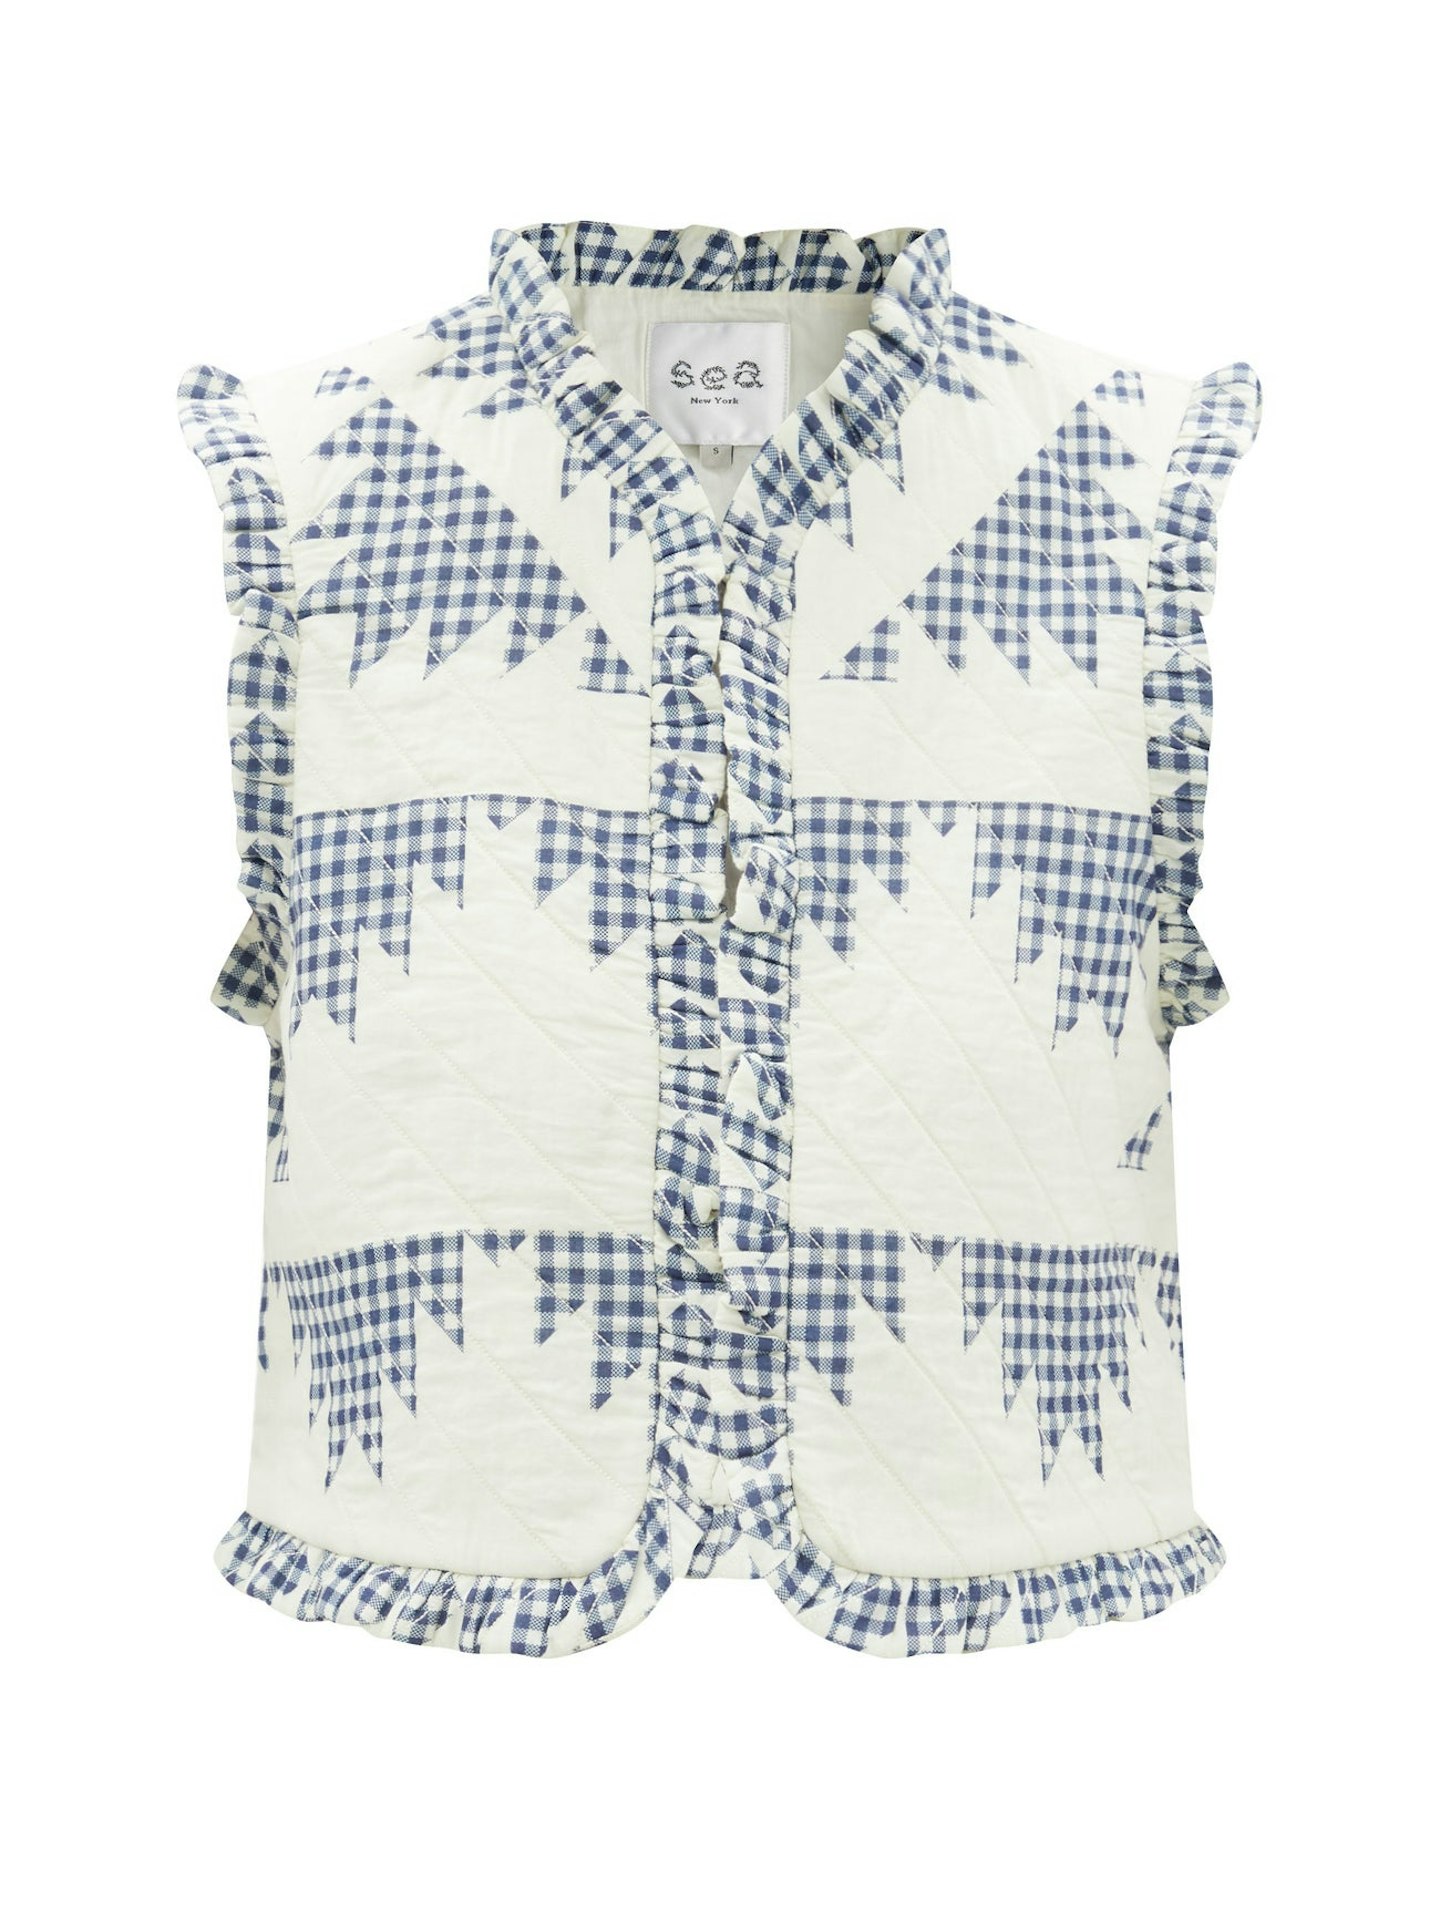 SEA, Gloucester Patchwork-Gingham Quilted Cotton Gilet, £390